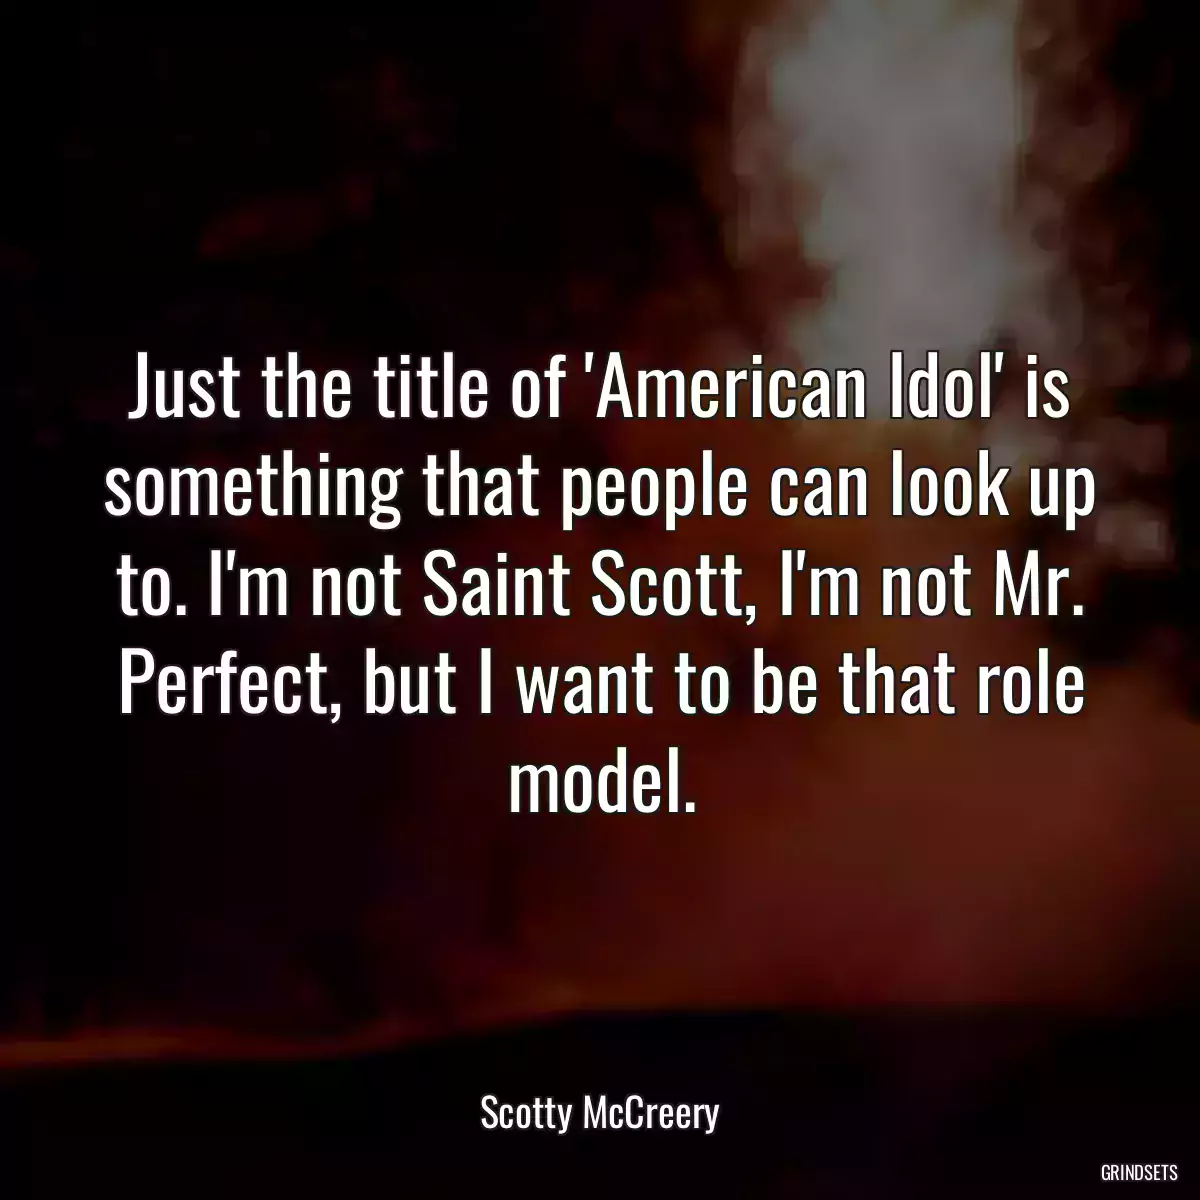 Just the title of \'American Idol\' is something that people can look up to. I\'m not Saint Scott, I\'m not Mr. Perfect, but I want to be that role model.